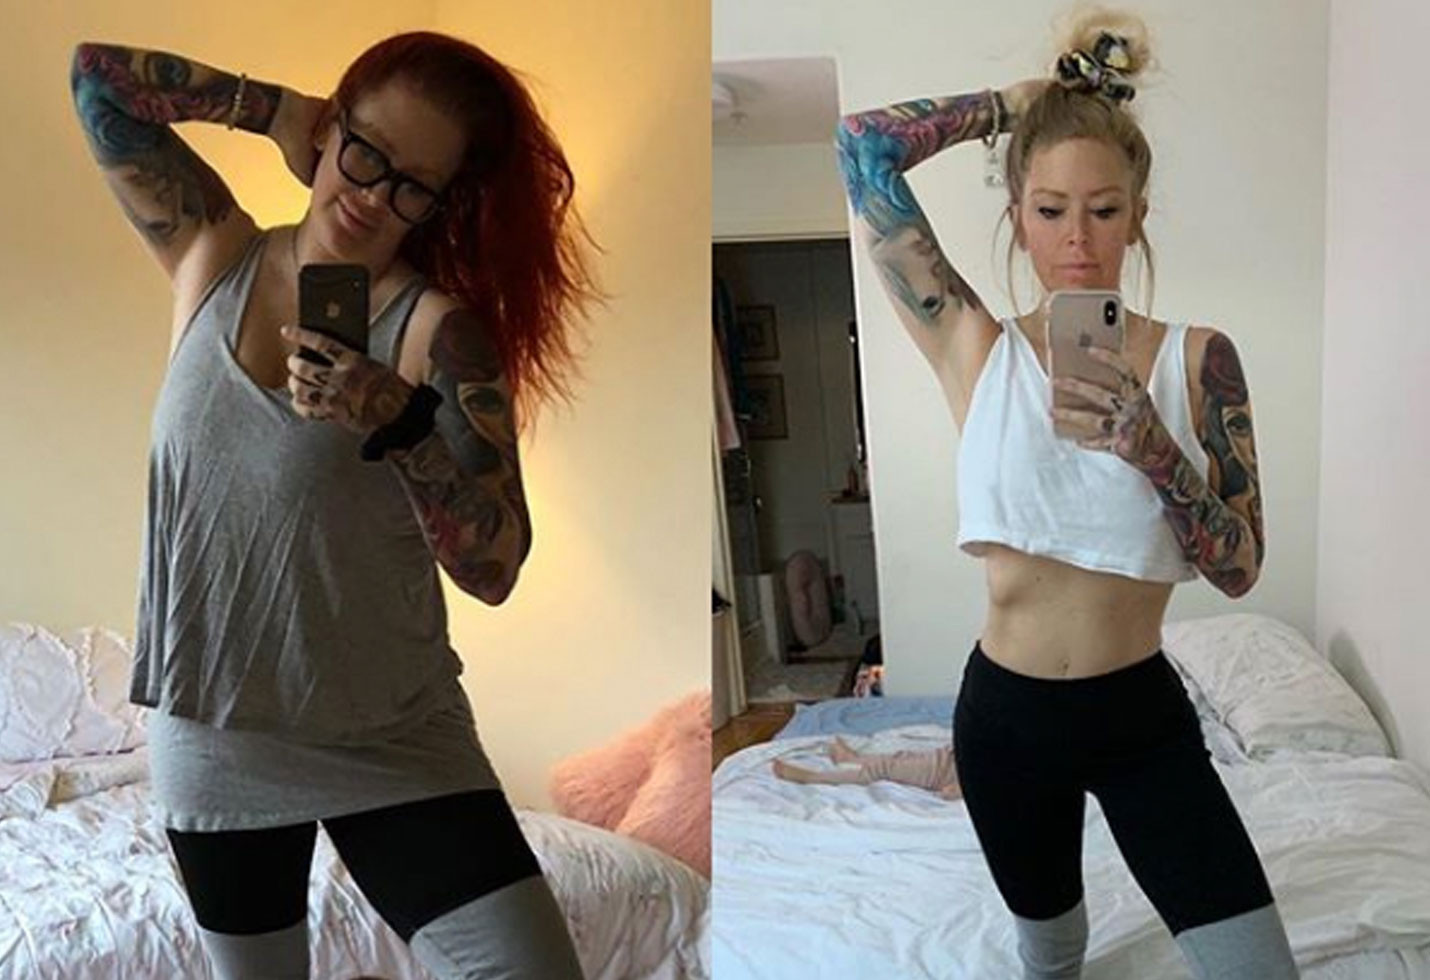 Keto Diet Before After
 Jenna Jameson Defends Keto Diet After 80 Lb Weight Loss